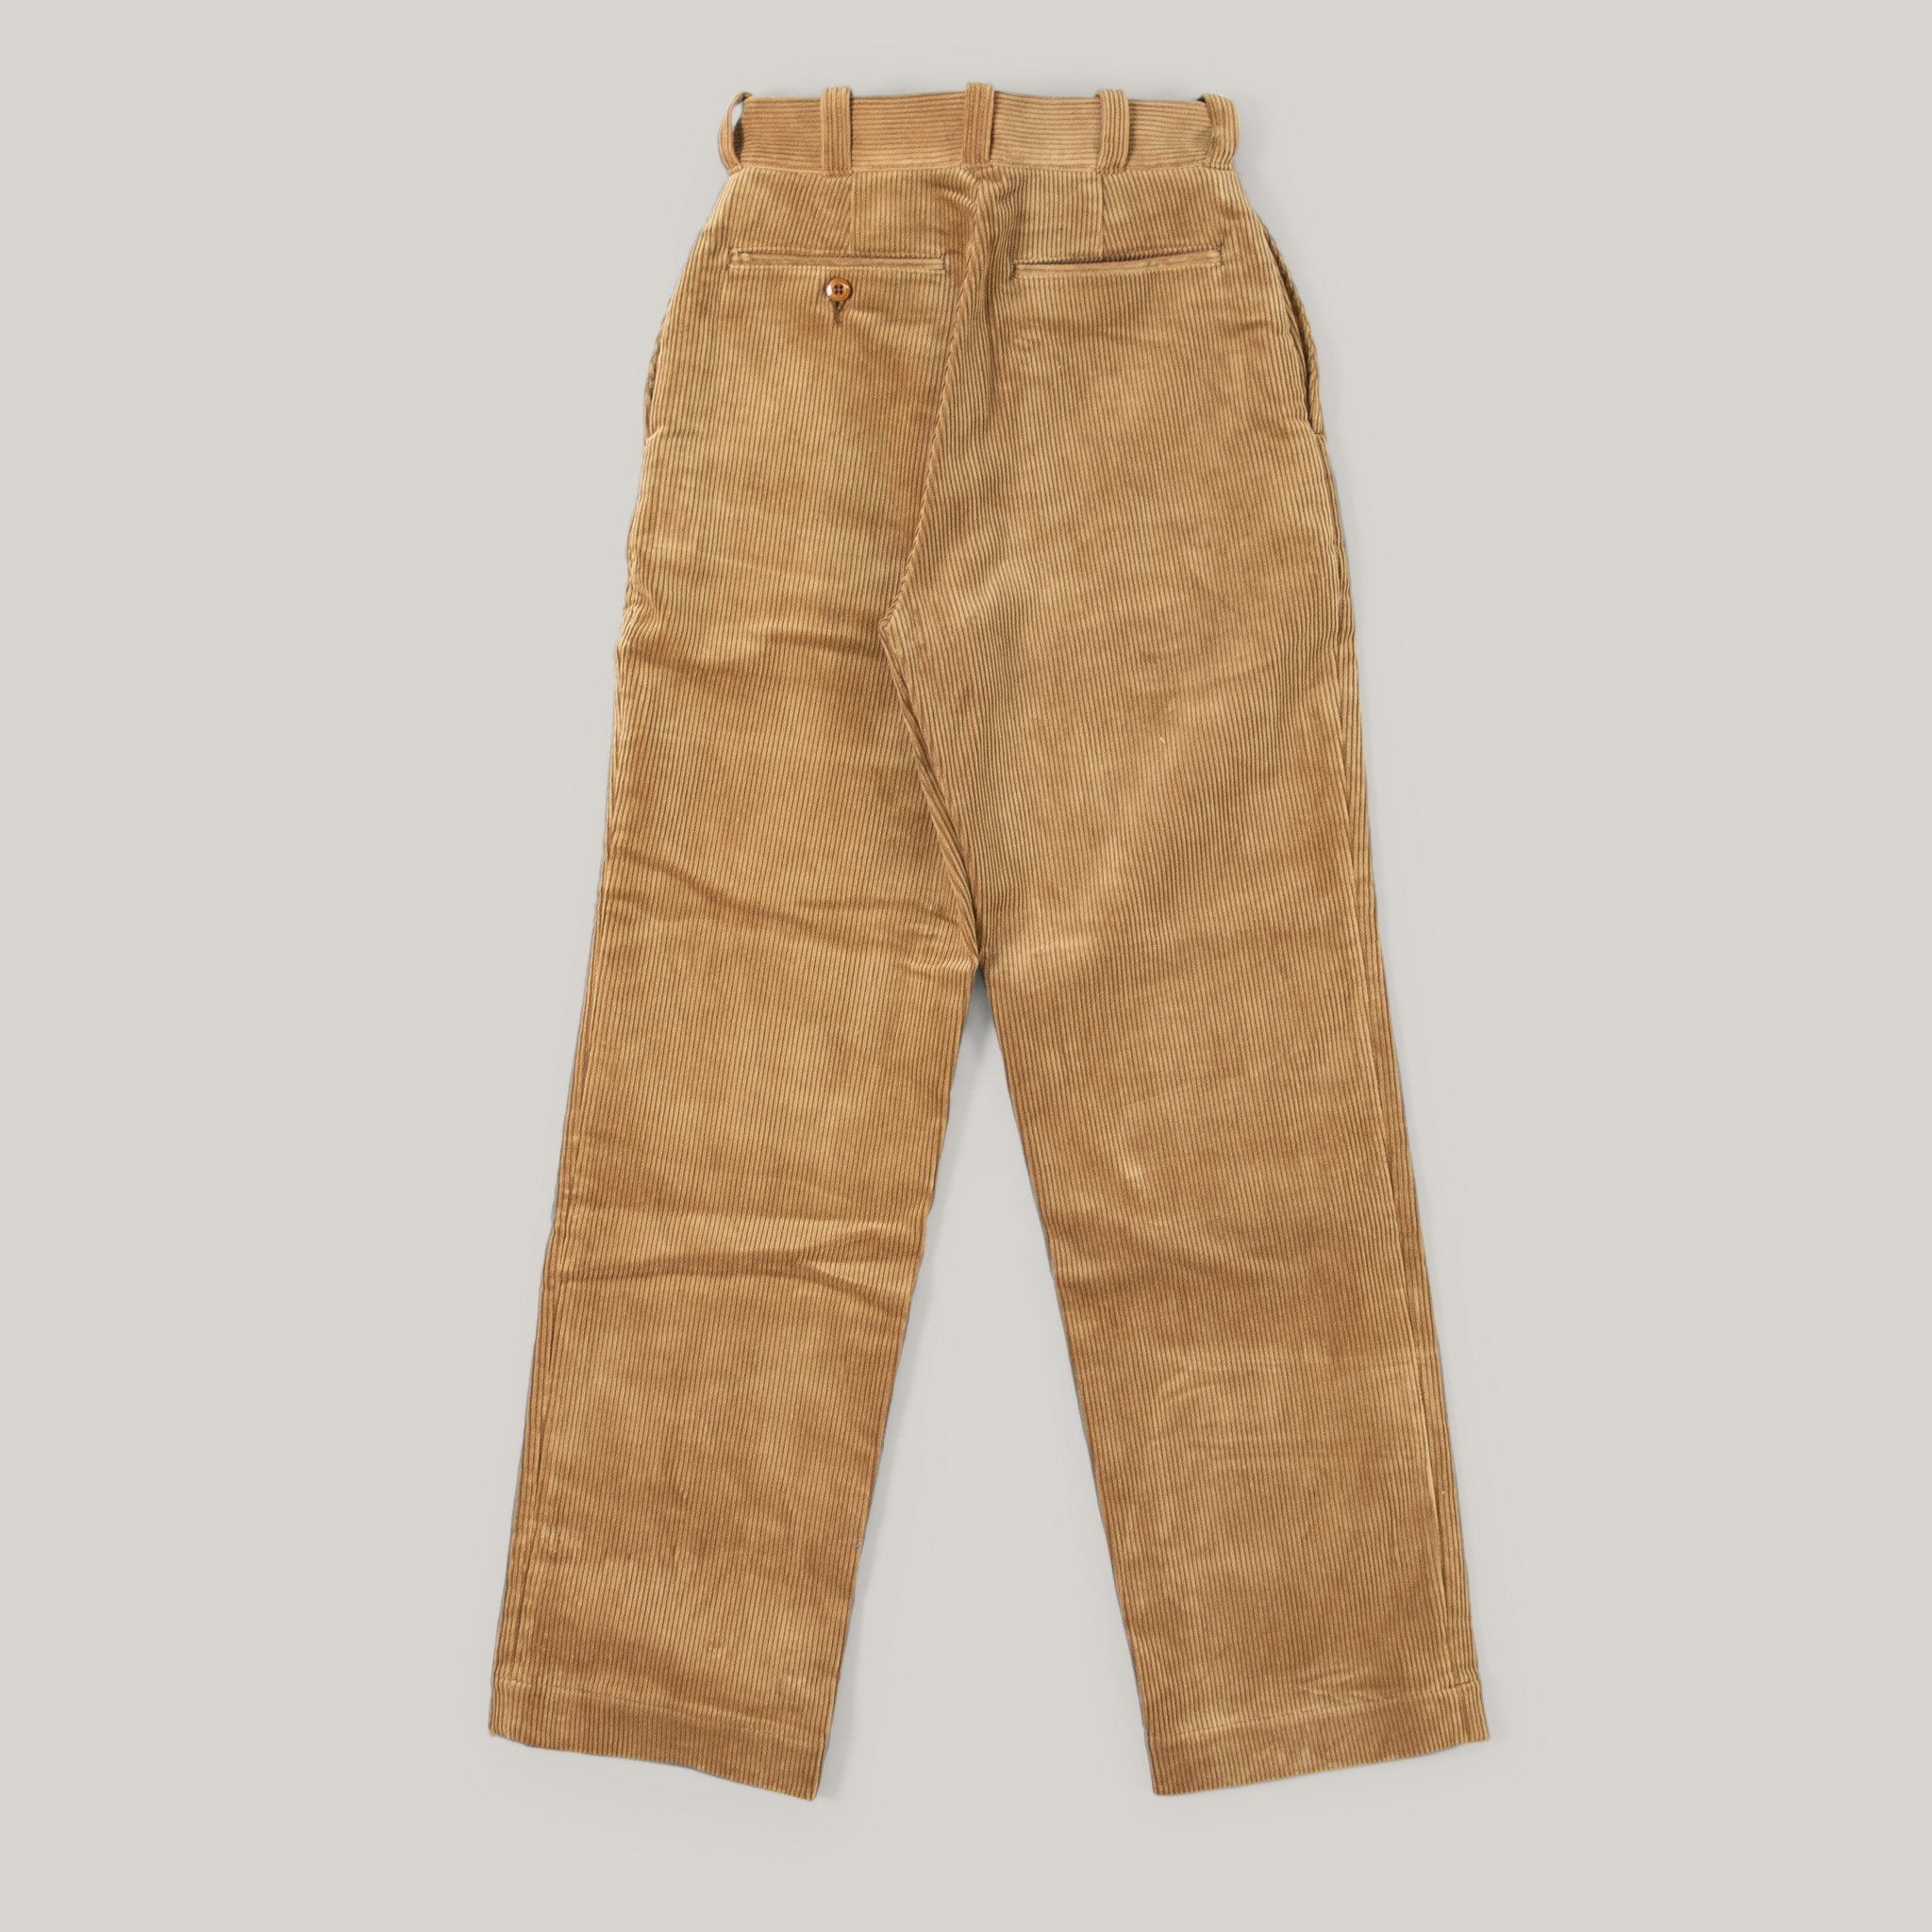 Flint and Tinder 365 Corduroy Pant - Athletic Tapered - Earth